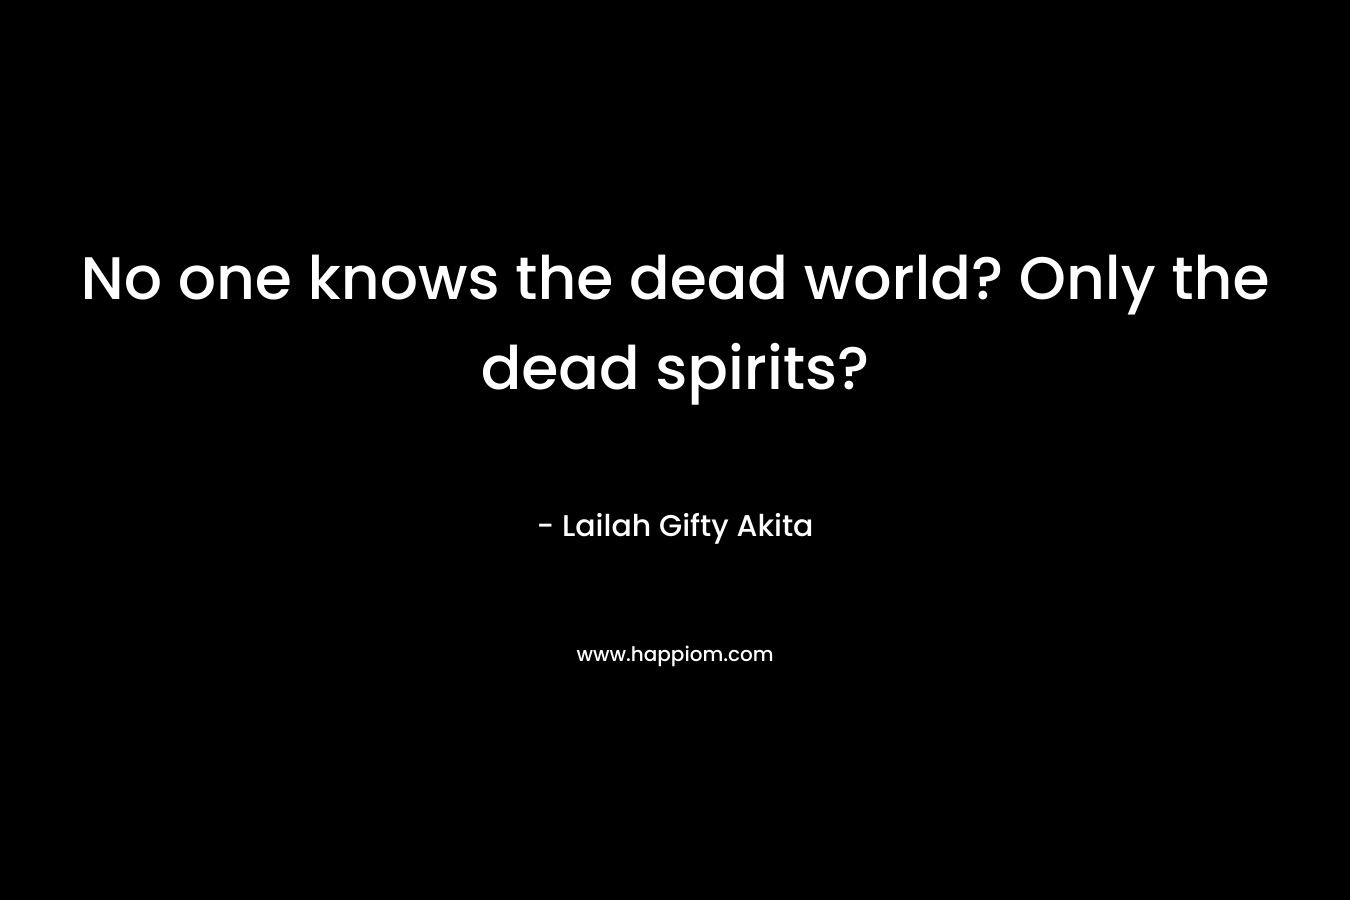 No one knows the dead world? Only the dead spirits?